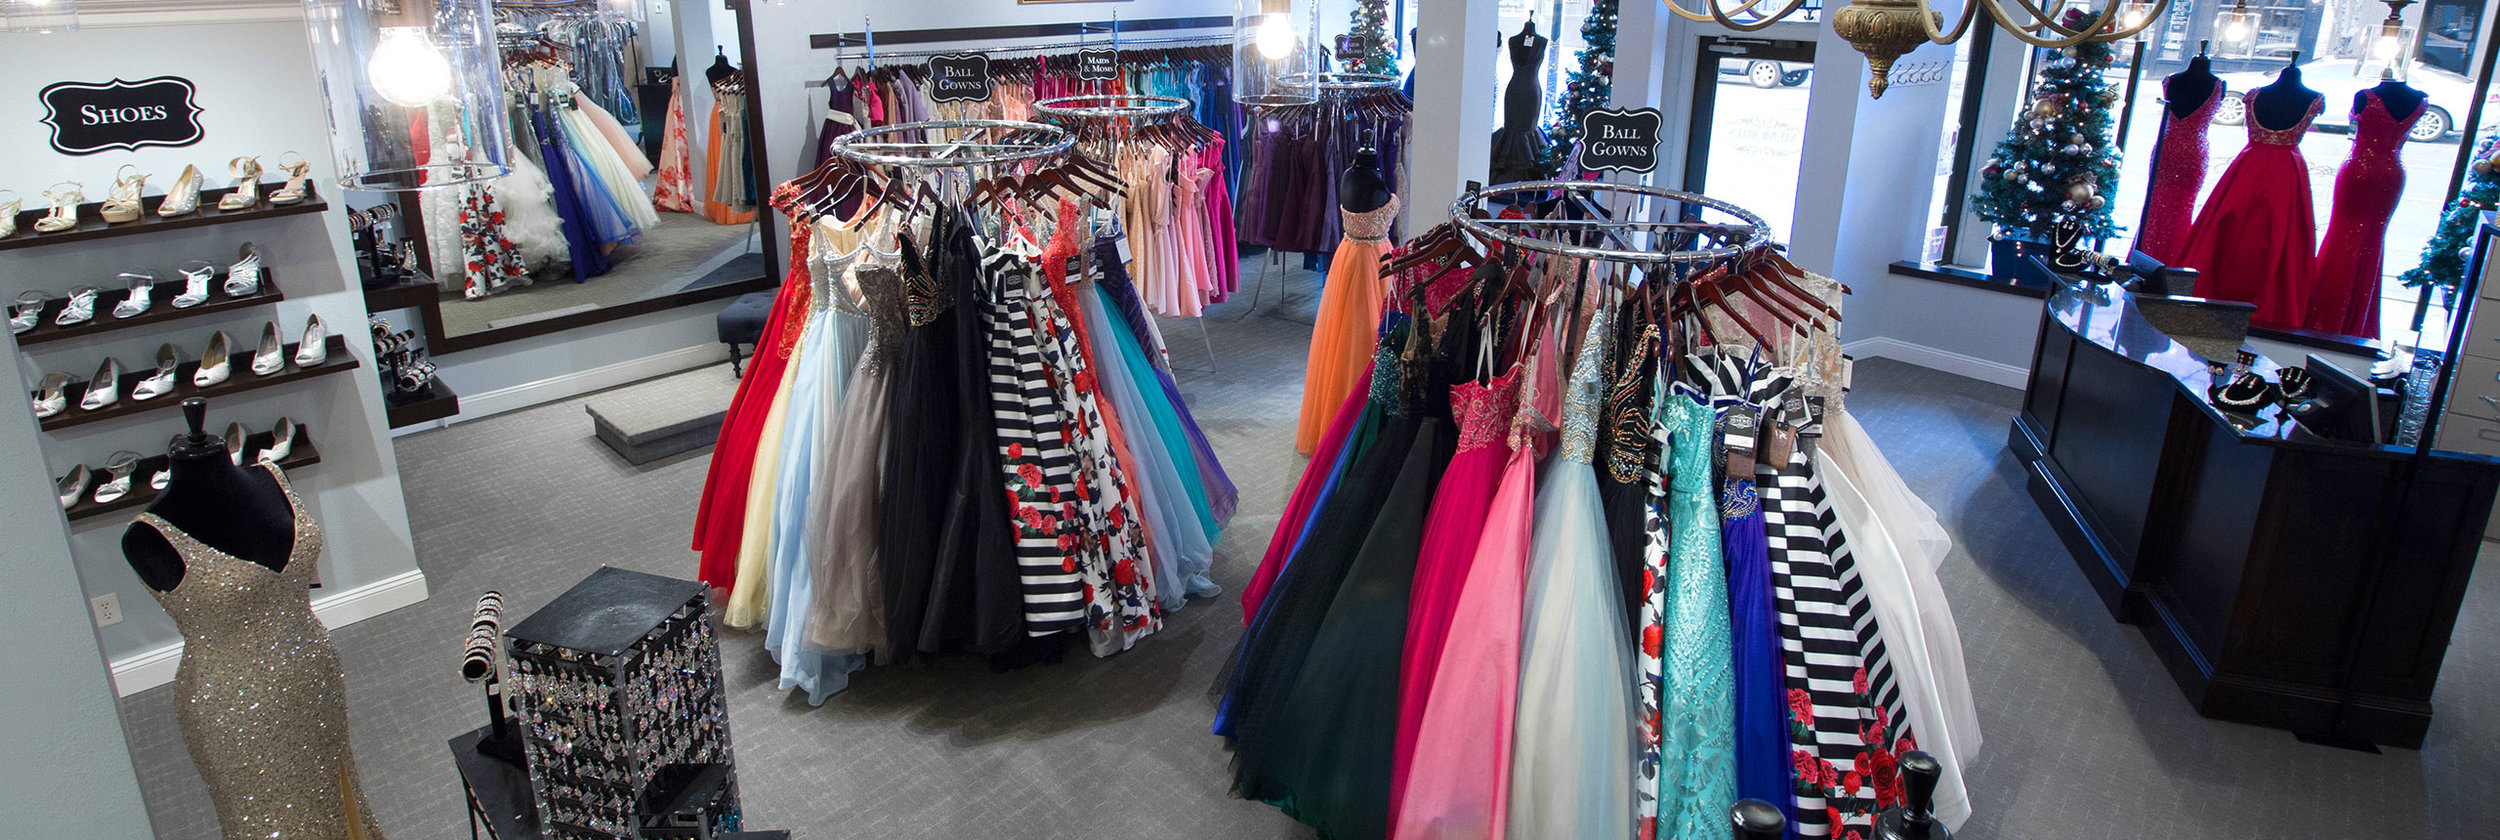 prom dress outlet stores